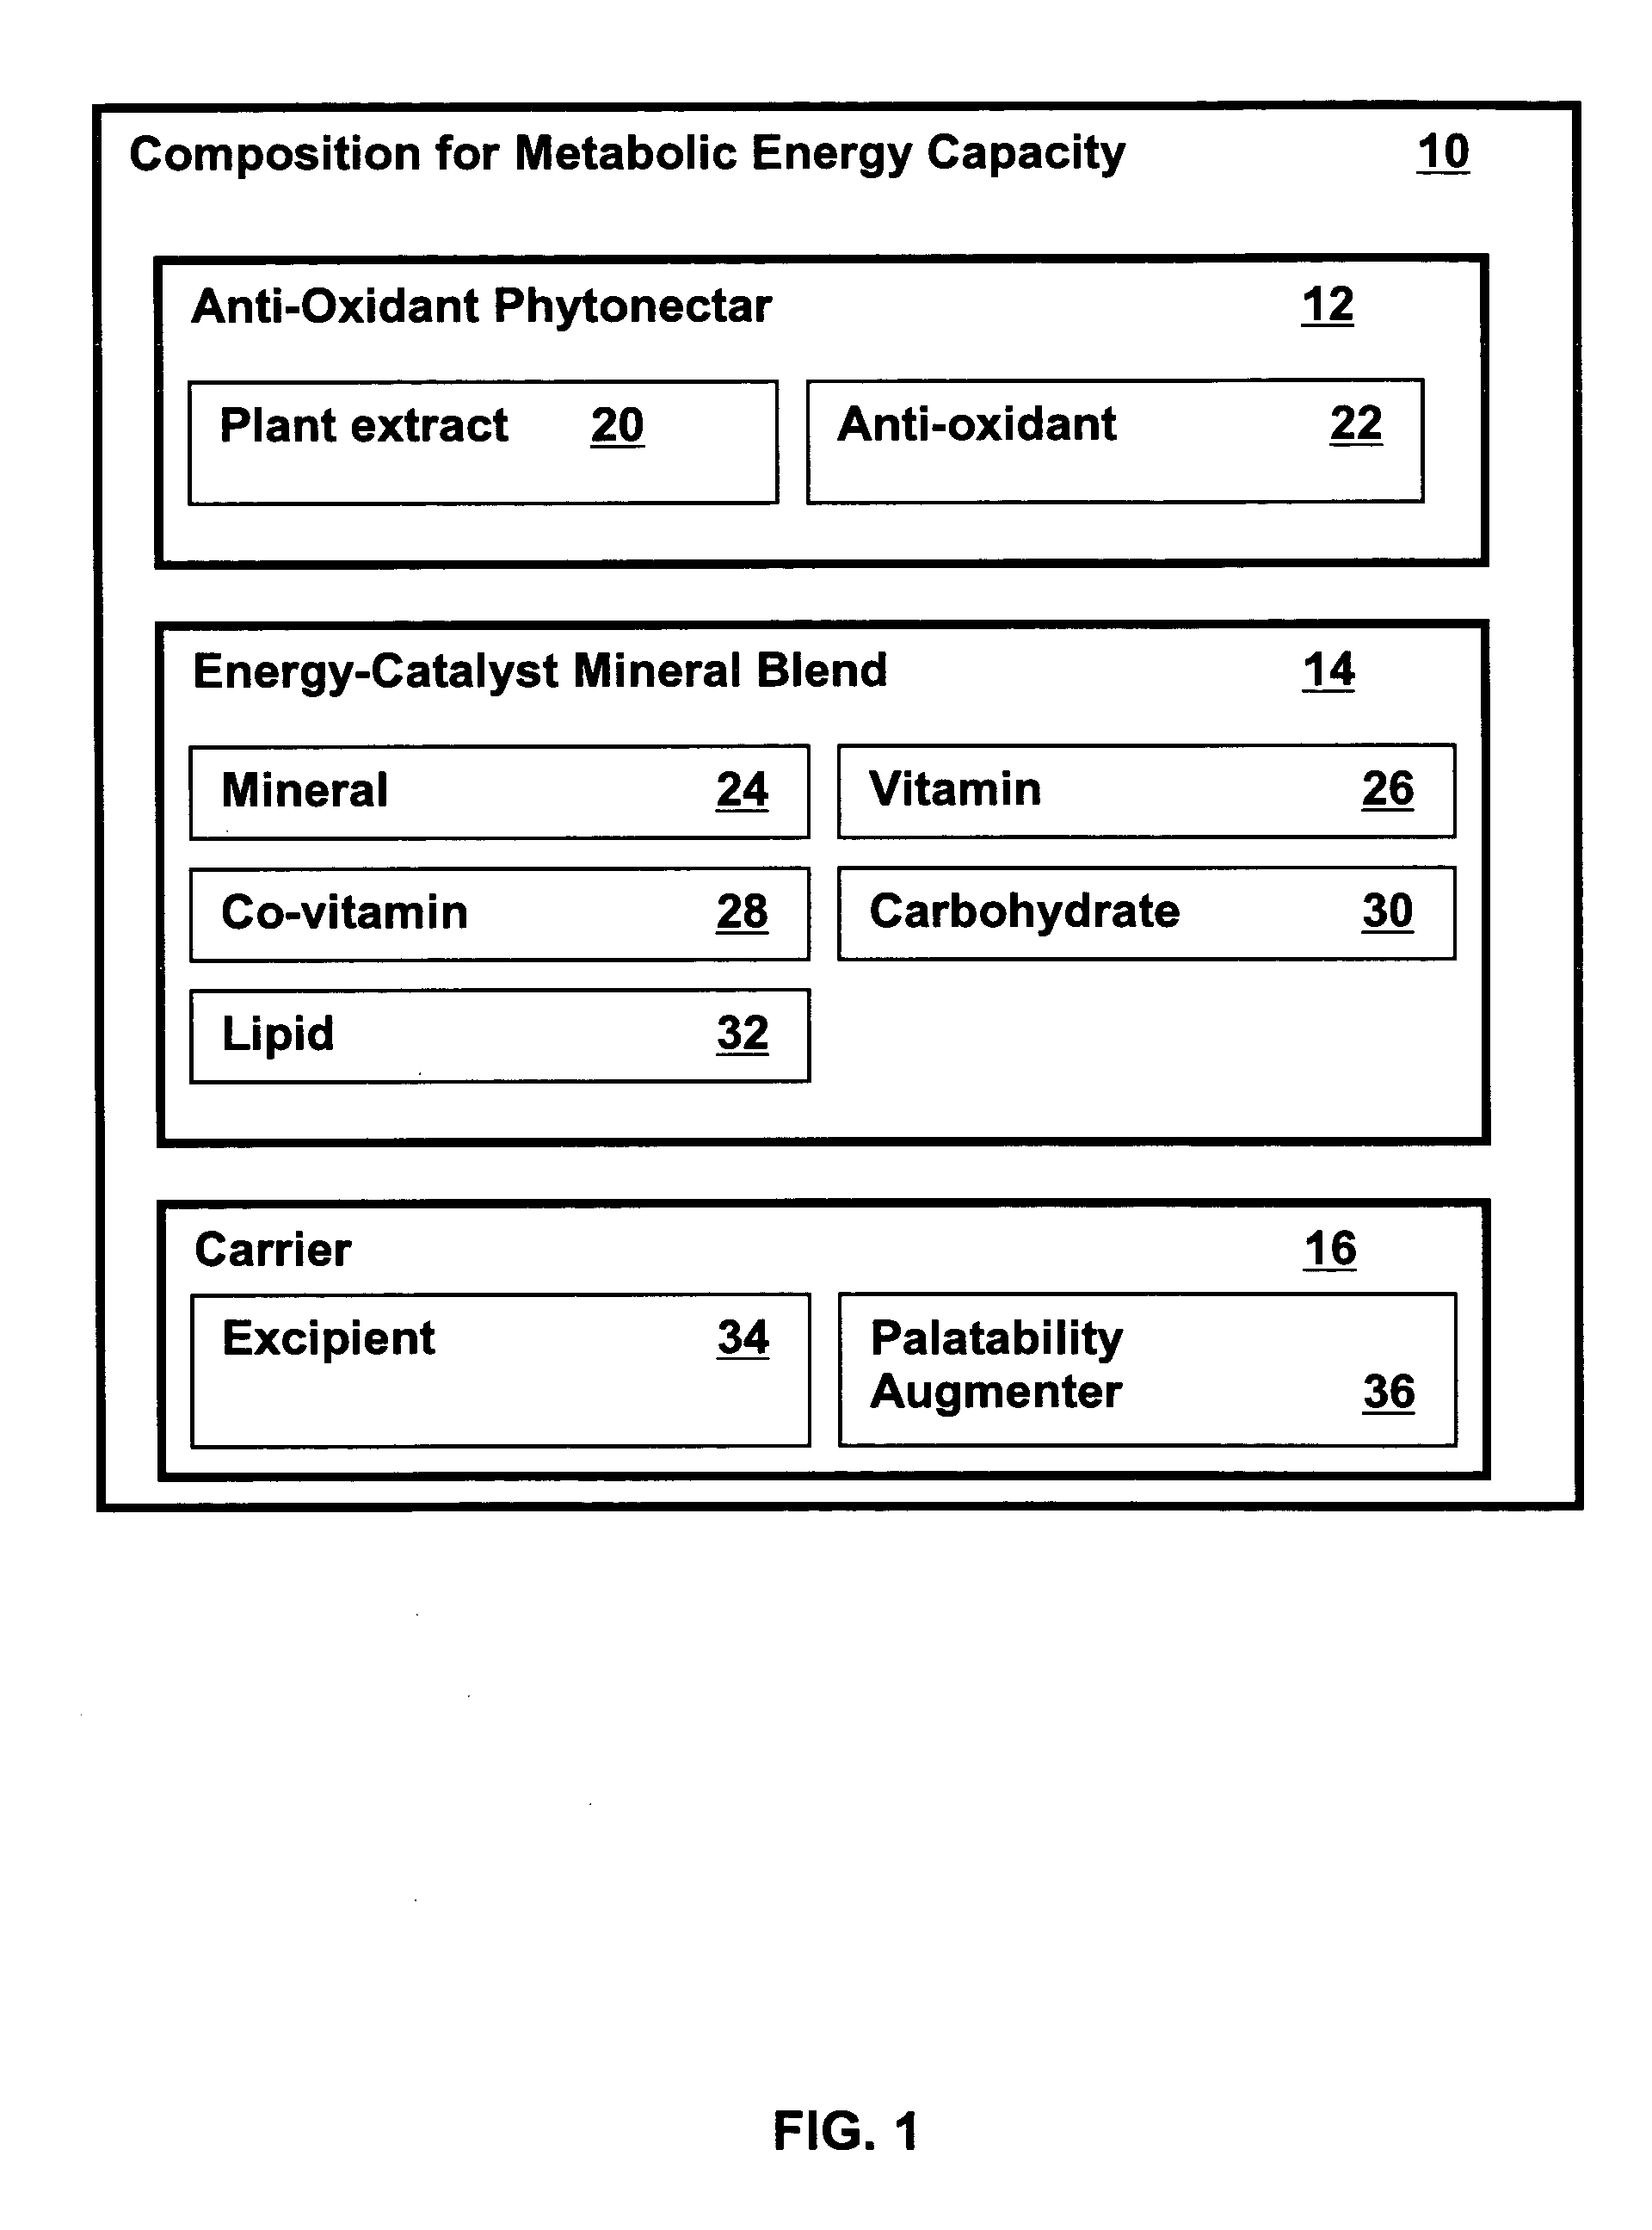 Metabolic capacity enhancing compositions and methods for use in a mammal